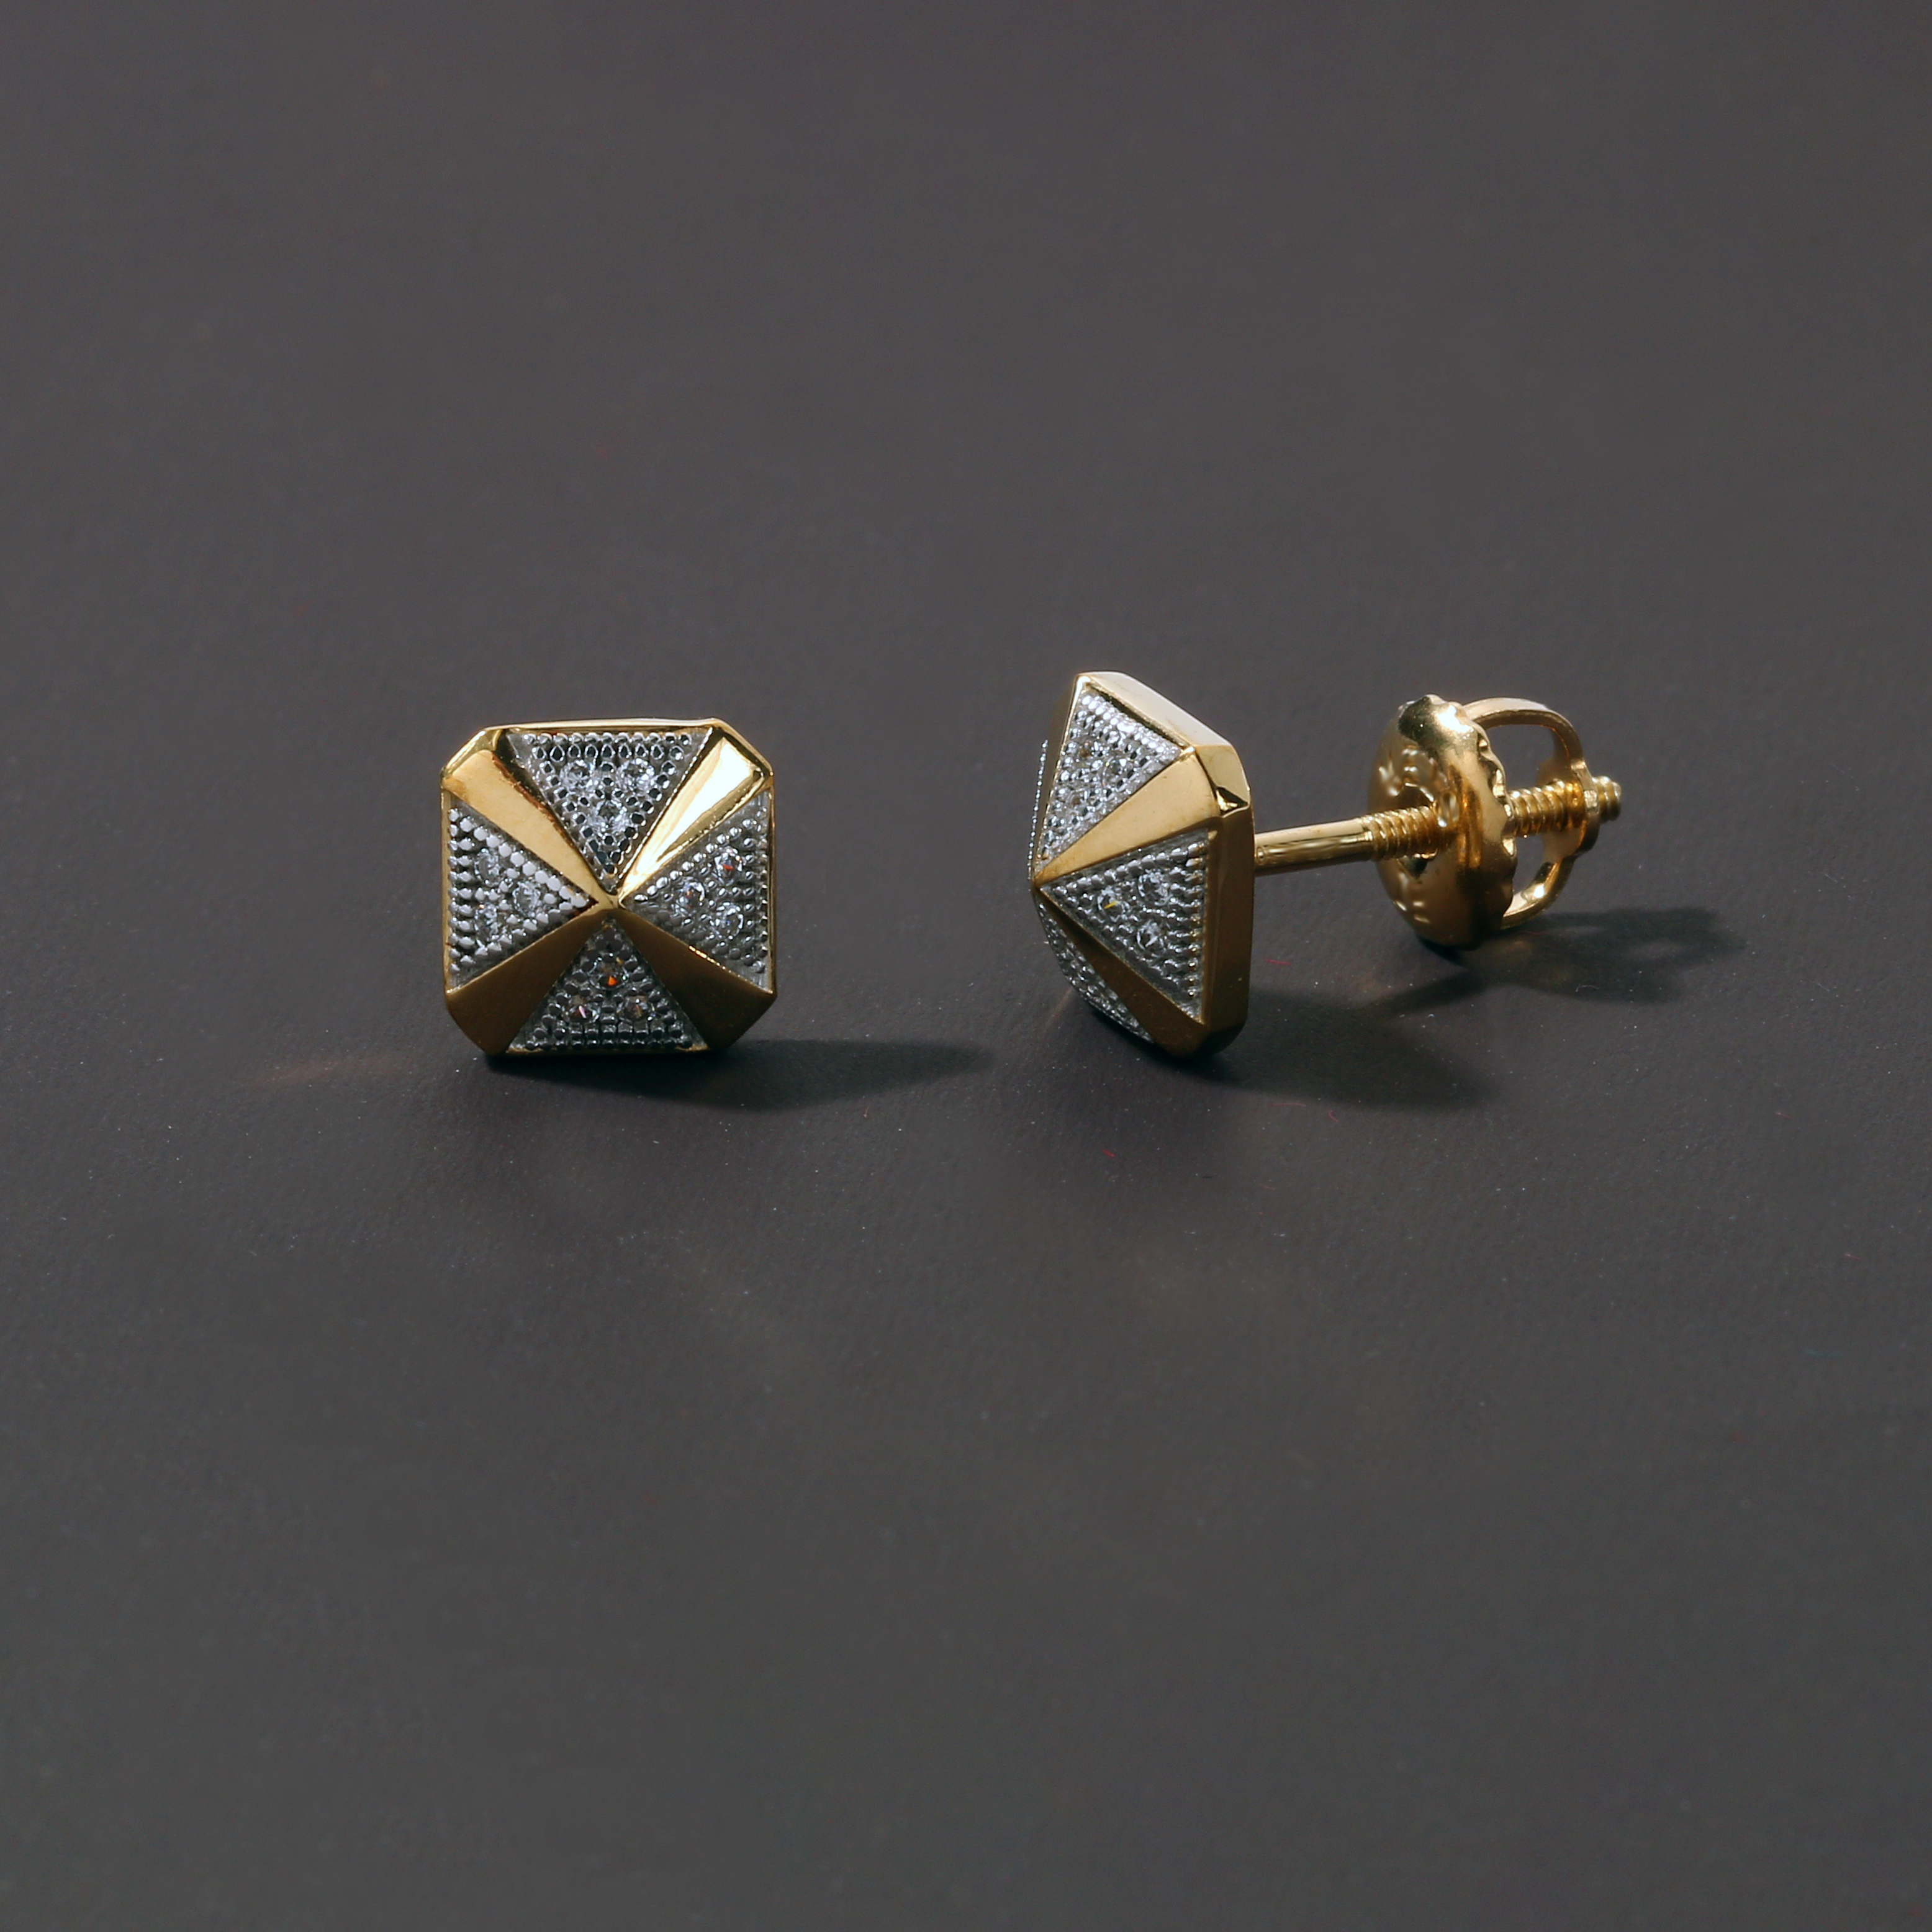 Amouria S925 Sterling Silver 1/10 Ct Diamond Stud Earrings with Yellow Rhodium Overlay